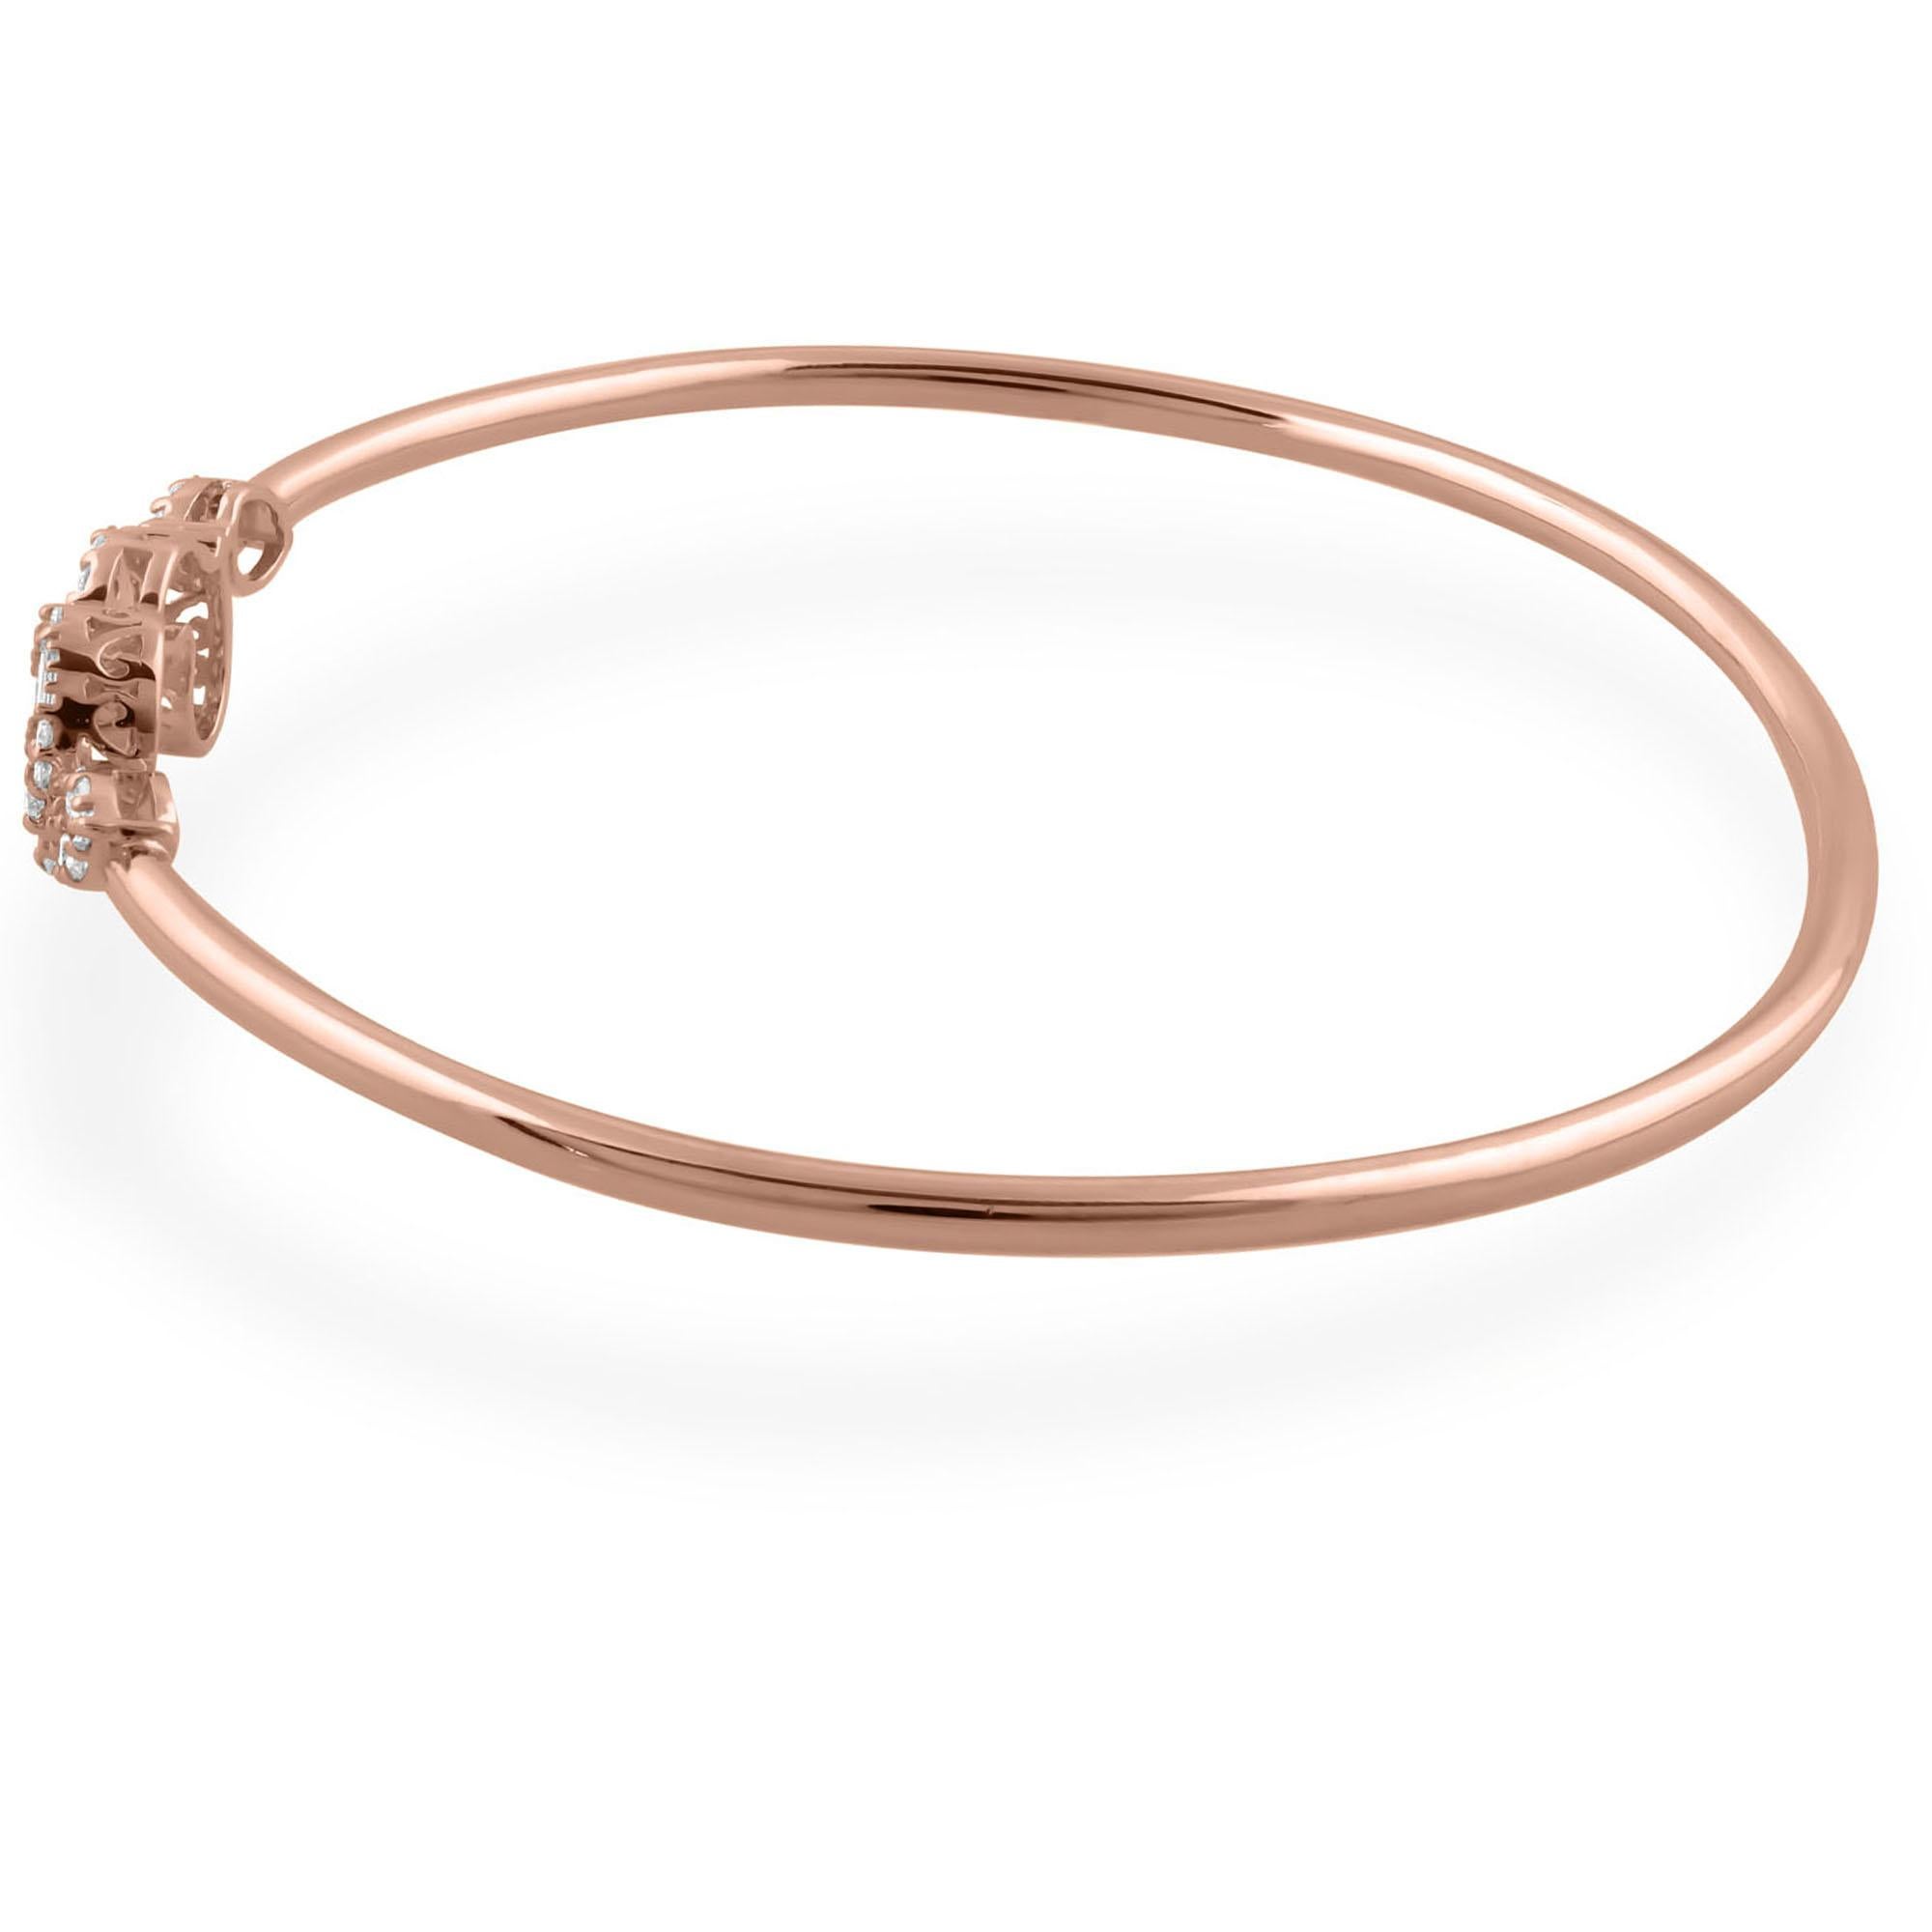 The bangle design adds a modern twist to this classic piece, ensuring a comfortable and secure fit while allowing the beauty of the diamonds to take center stage. Whether worn alone as a statement piece or stacked with other bracelets for a more